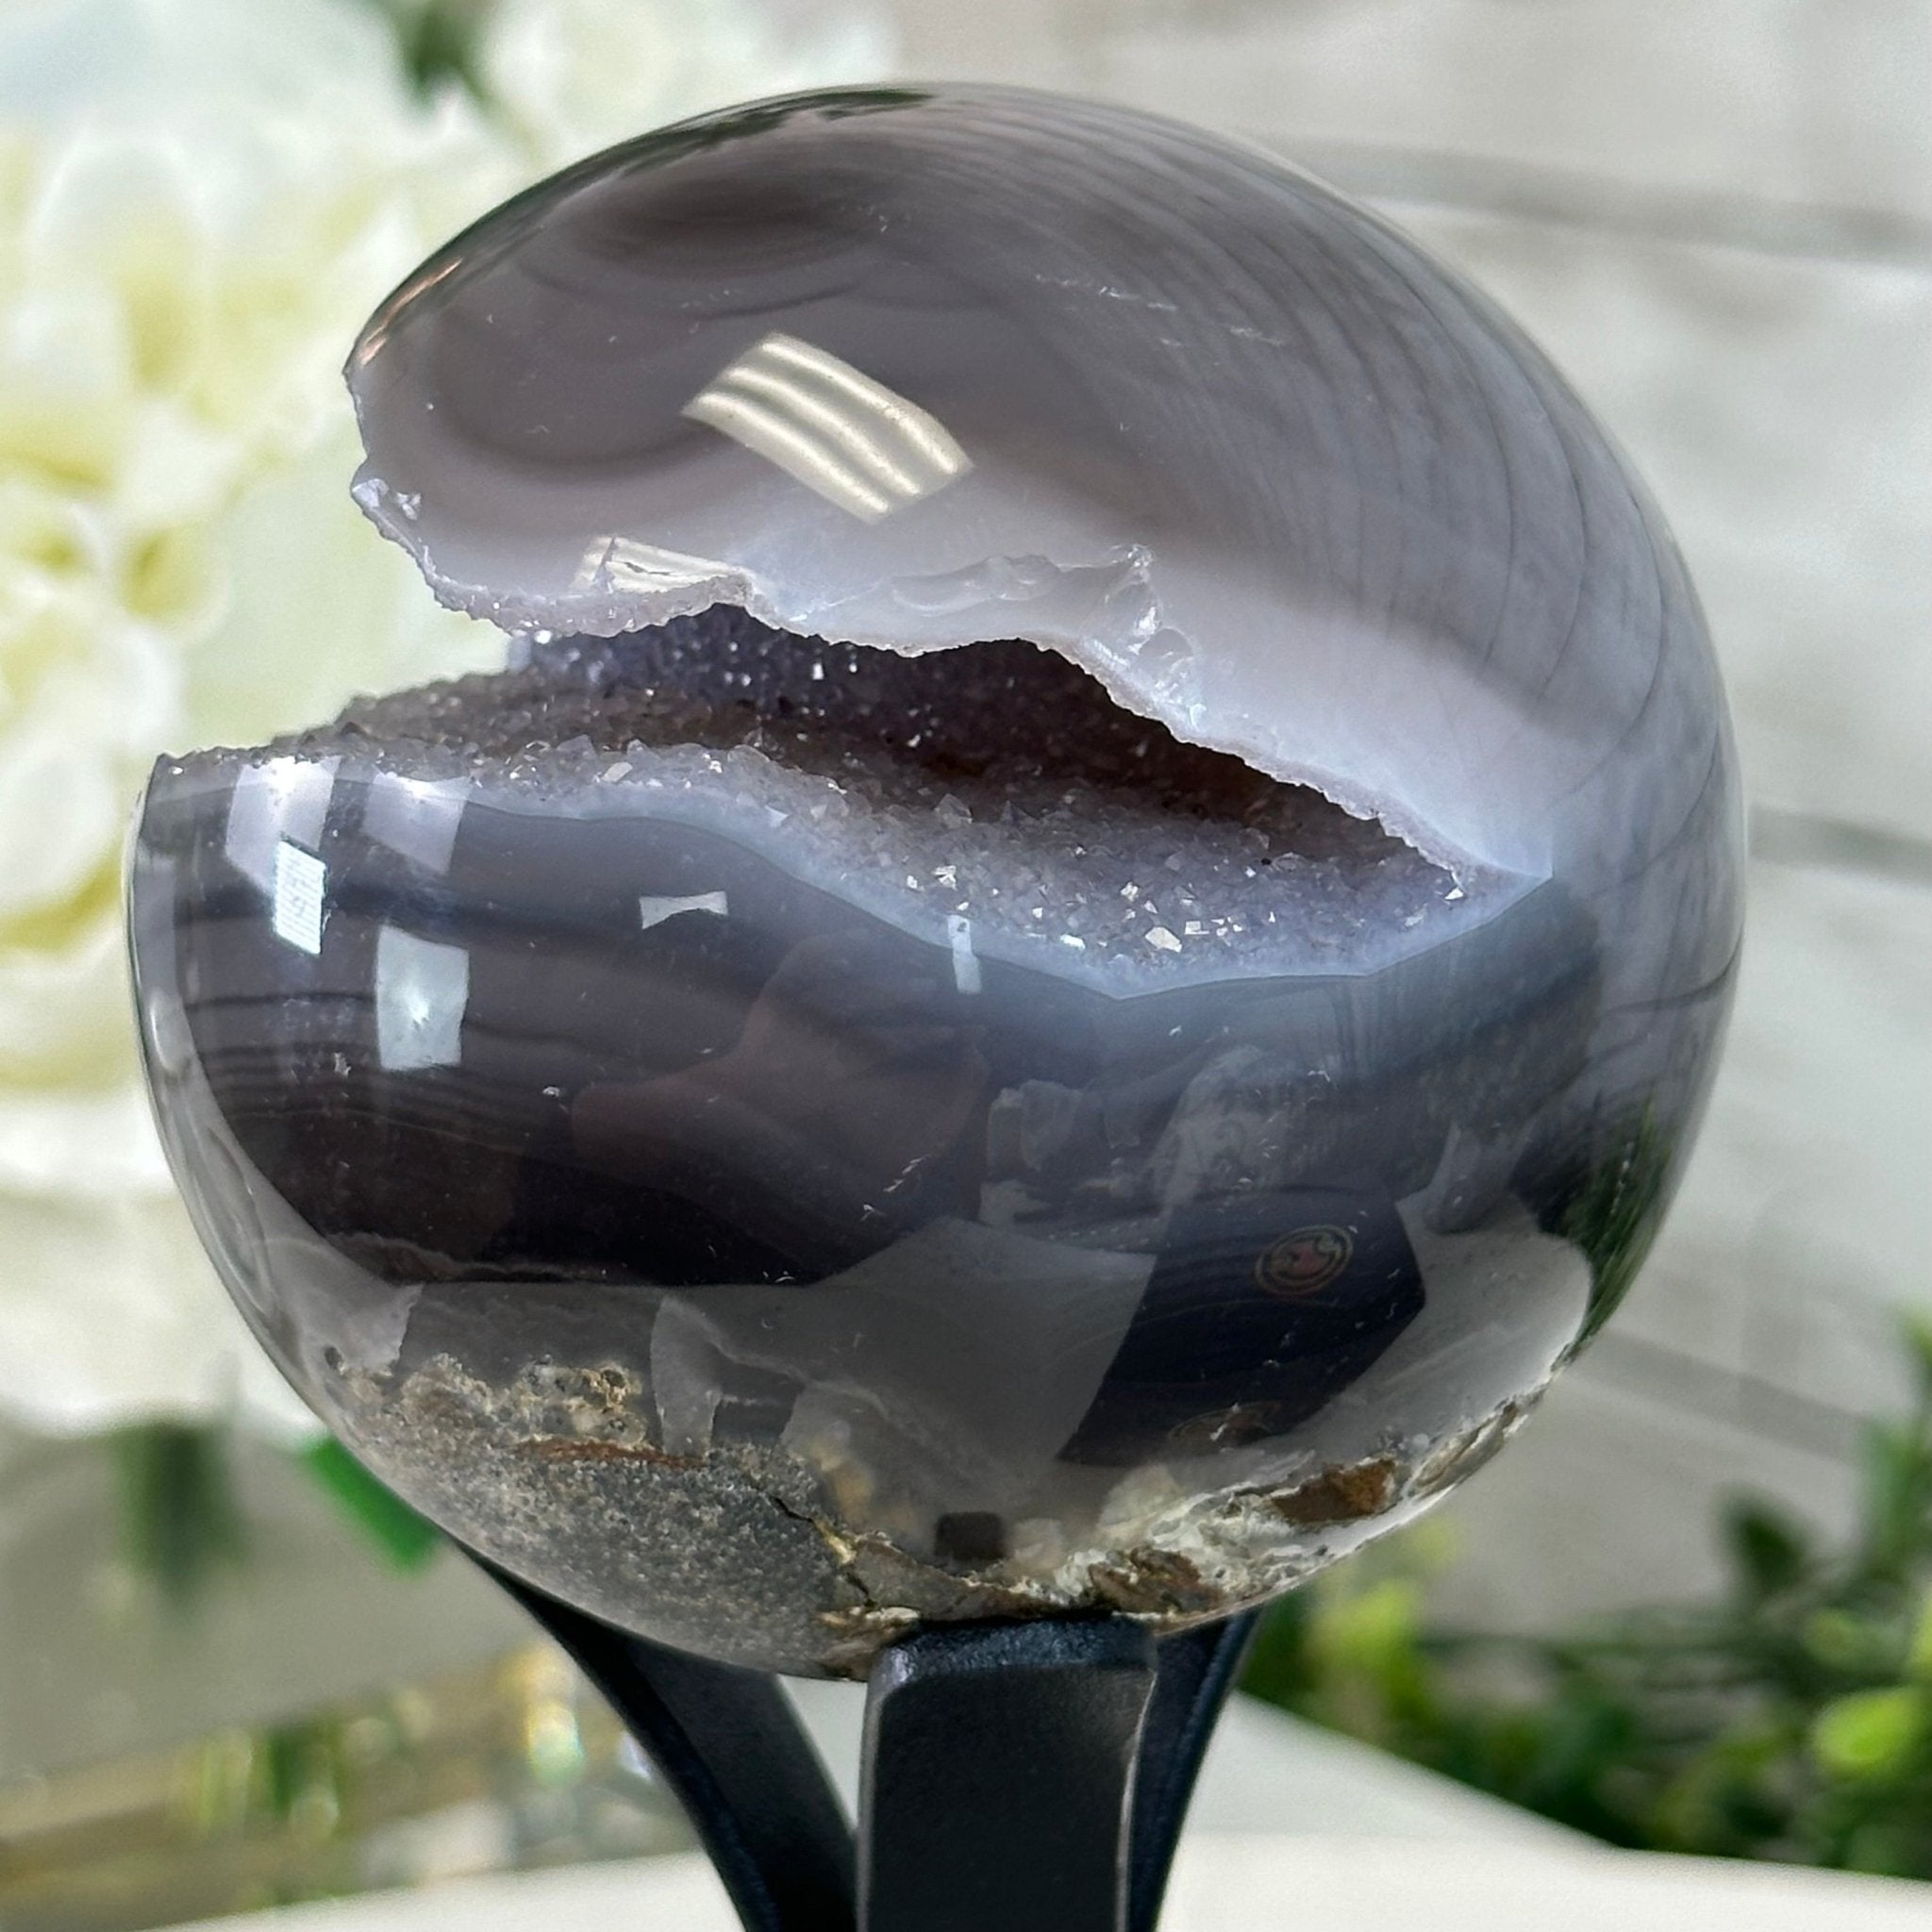 Druzy Agate Sphere on a Metal Stand, 1.3 lbs & 6.7" Tall #5634-0007 - Brazil GemsBrazil GemsDruzy Agate Sphere on a Metal Stand, 1.3 lbs & 6.7" Tall #5634-0007Spheres5634-0007